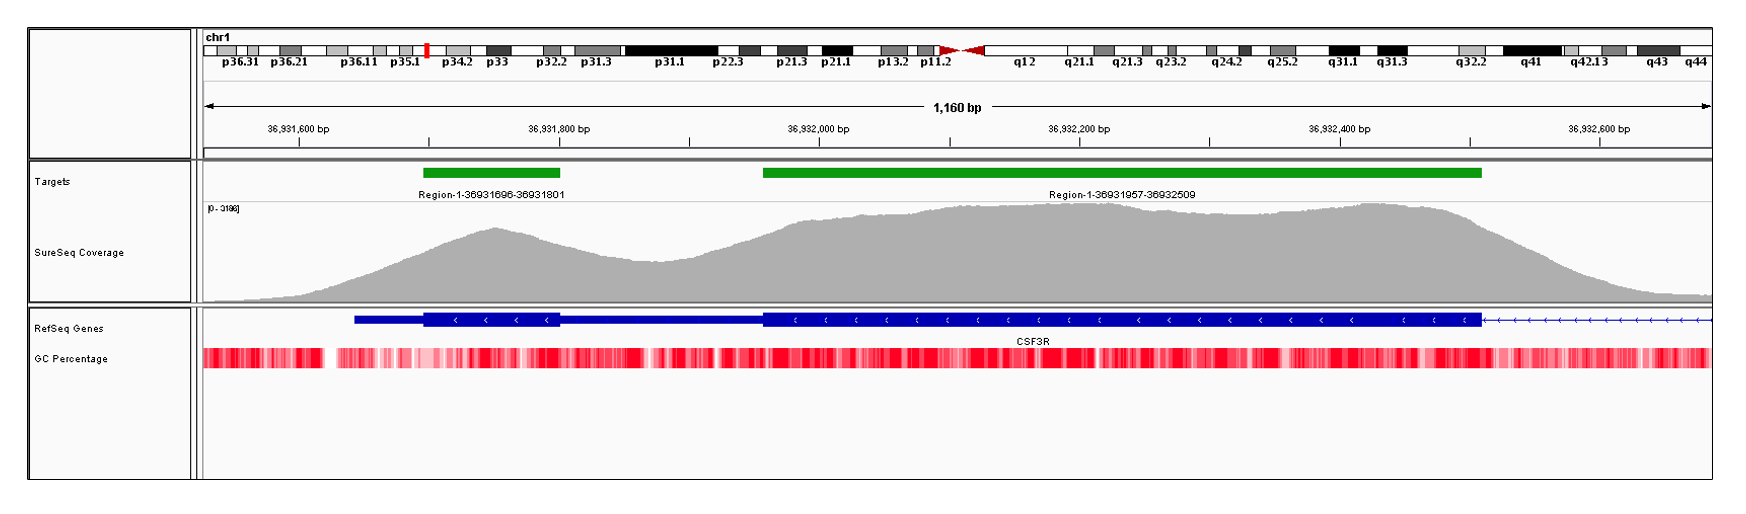 CSF3R Exons 17 (hg19 chr1:36931644-36932428)  and 18 (hg19 chr1:36931644-36931801). Depth of coverage per base (grey). Targeted region (green). Gene coding region as defined by RefSeq (blue). GC percentage (red). Image